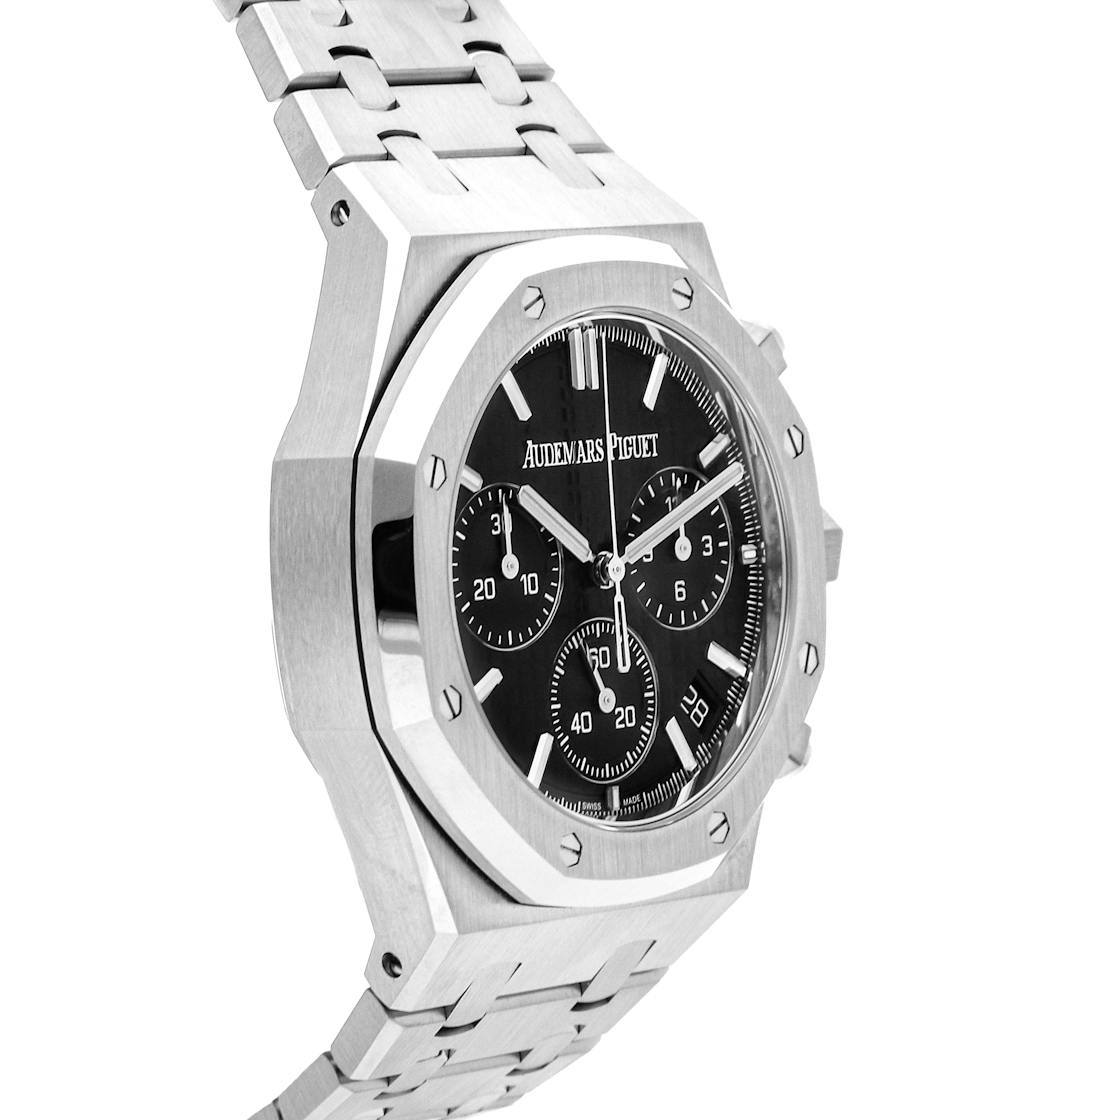 Insider: Audemars Piguet Royal Oak Chronograph 50th Anniversary ref.  26240ST with Live Photos — WATCH COLLECTING LIFESTYLE